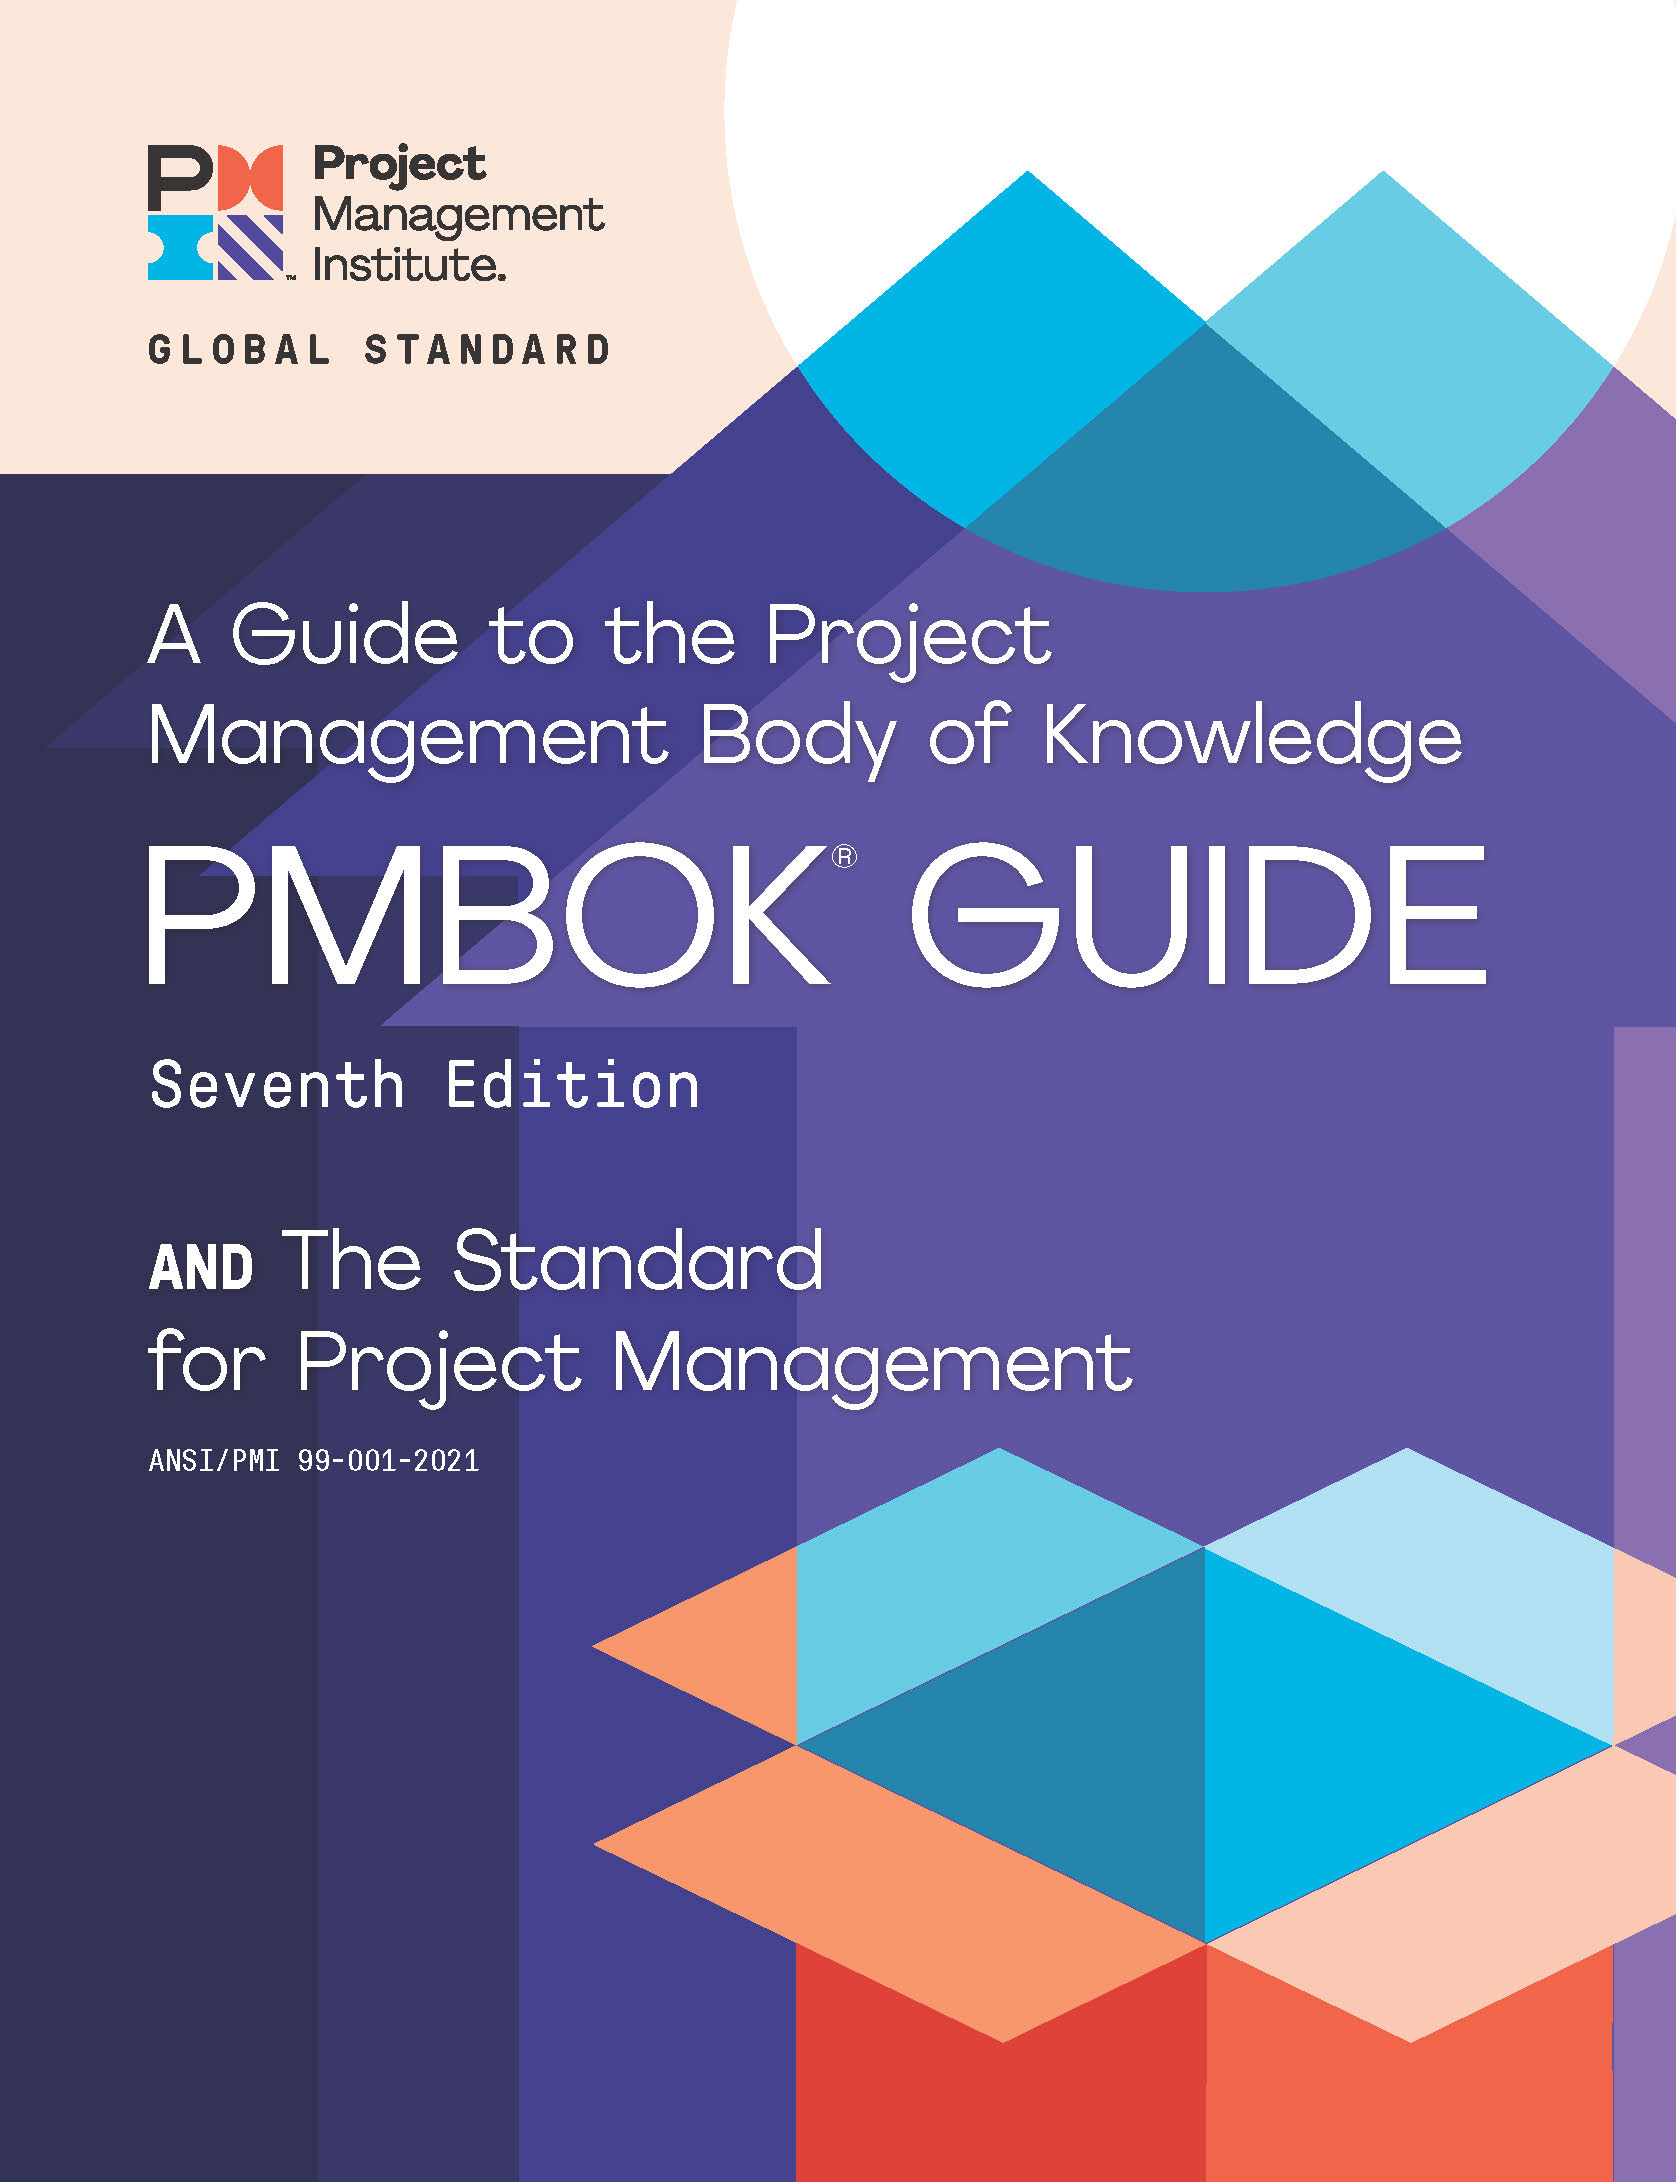 PMBOK Guide front cover